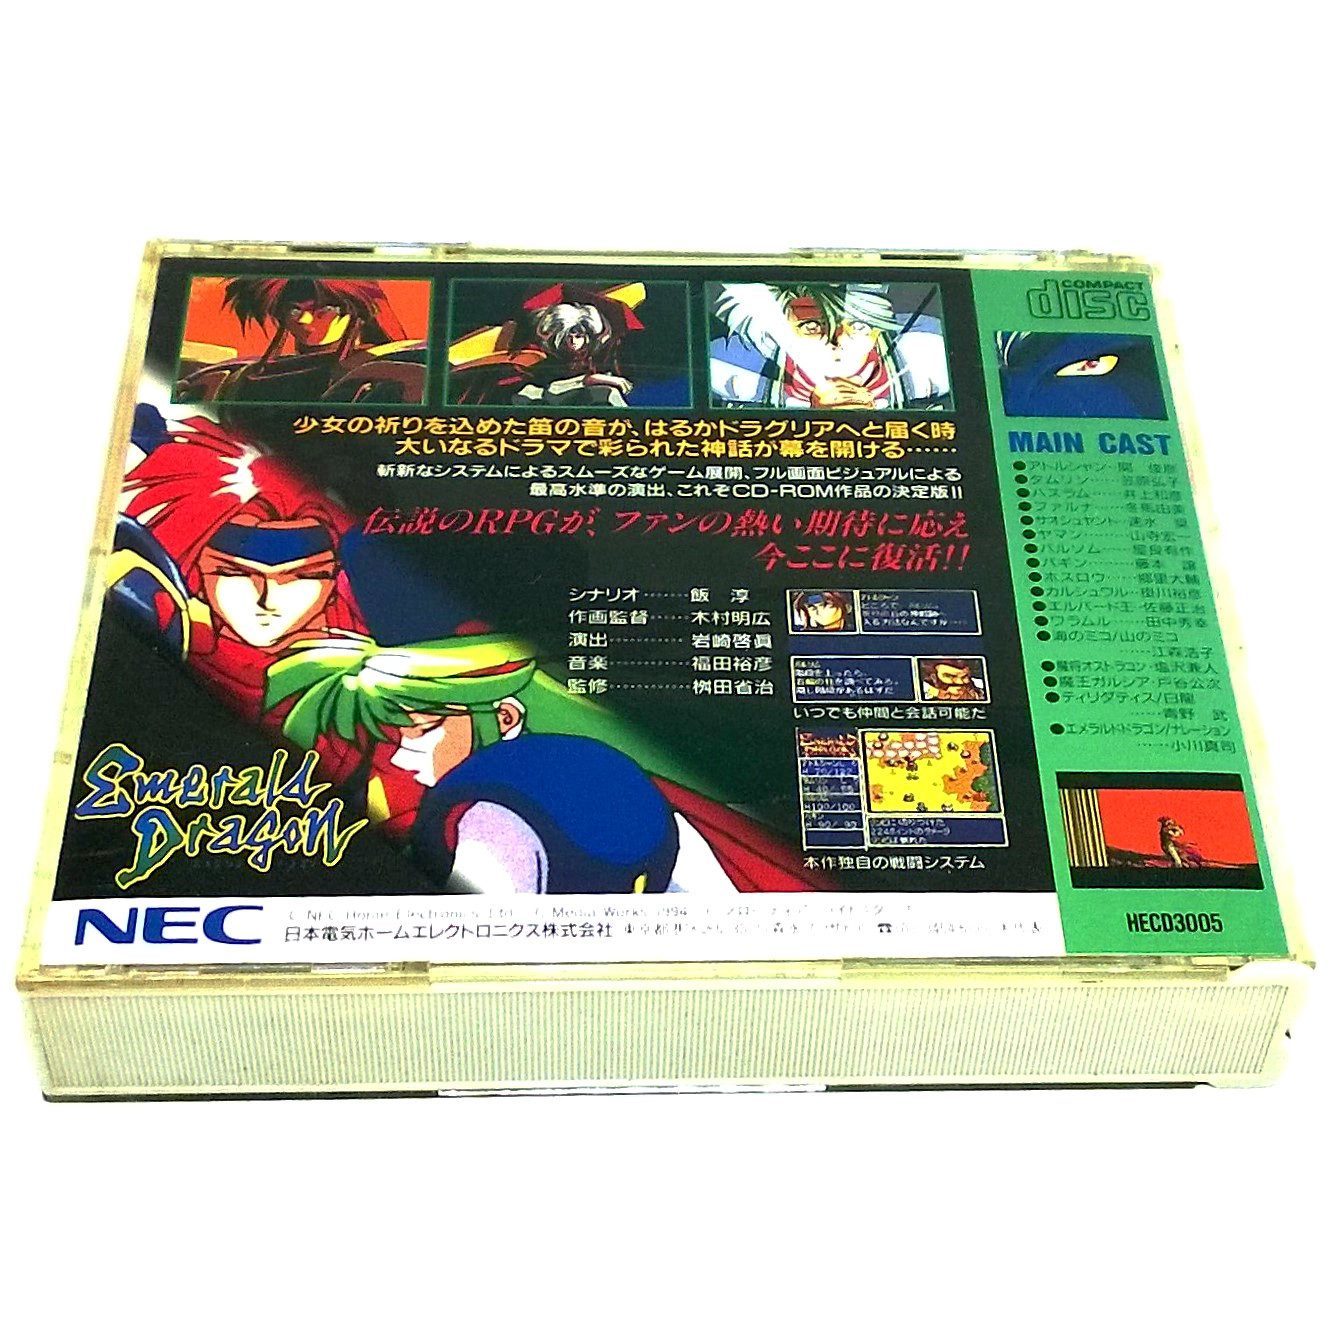 Emerald Dragon for PC Engine - Back of case